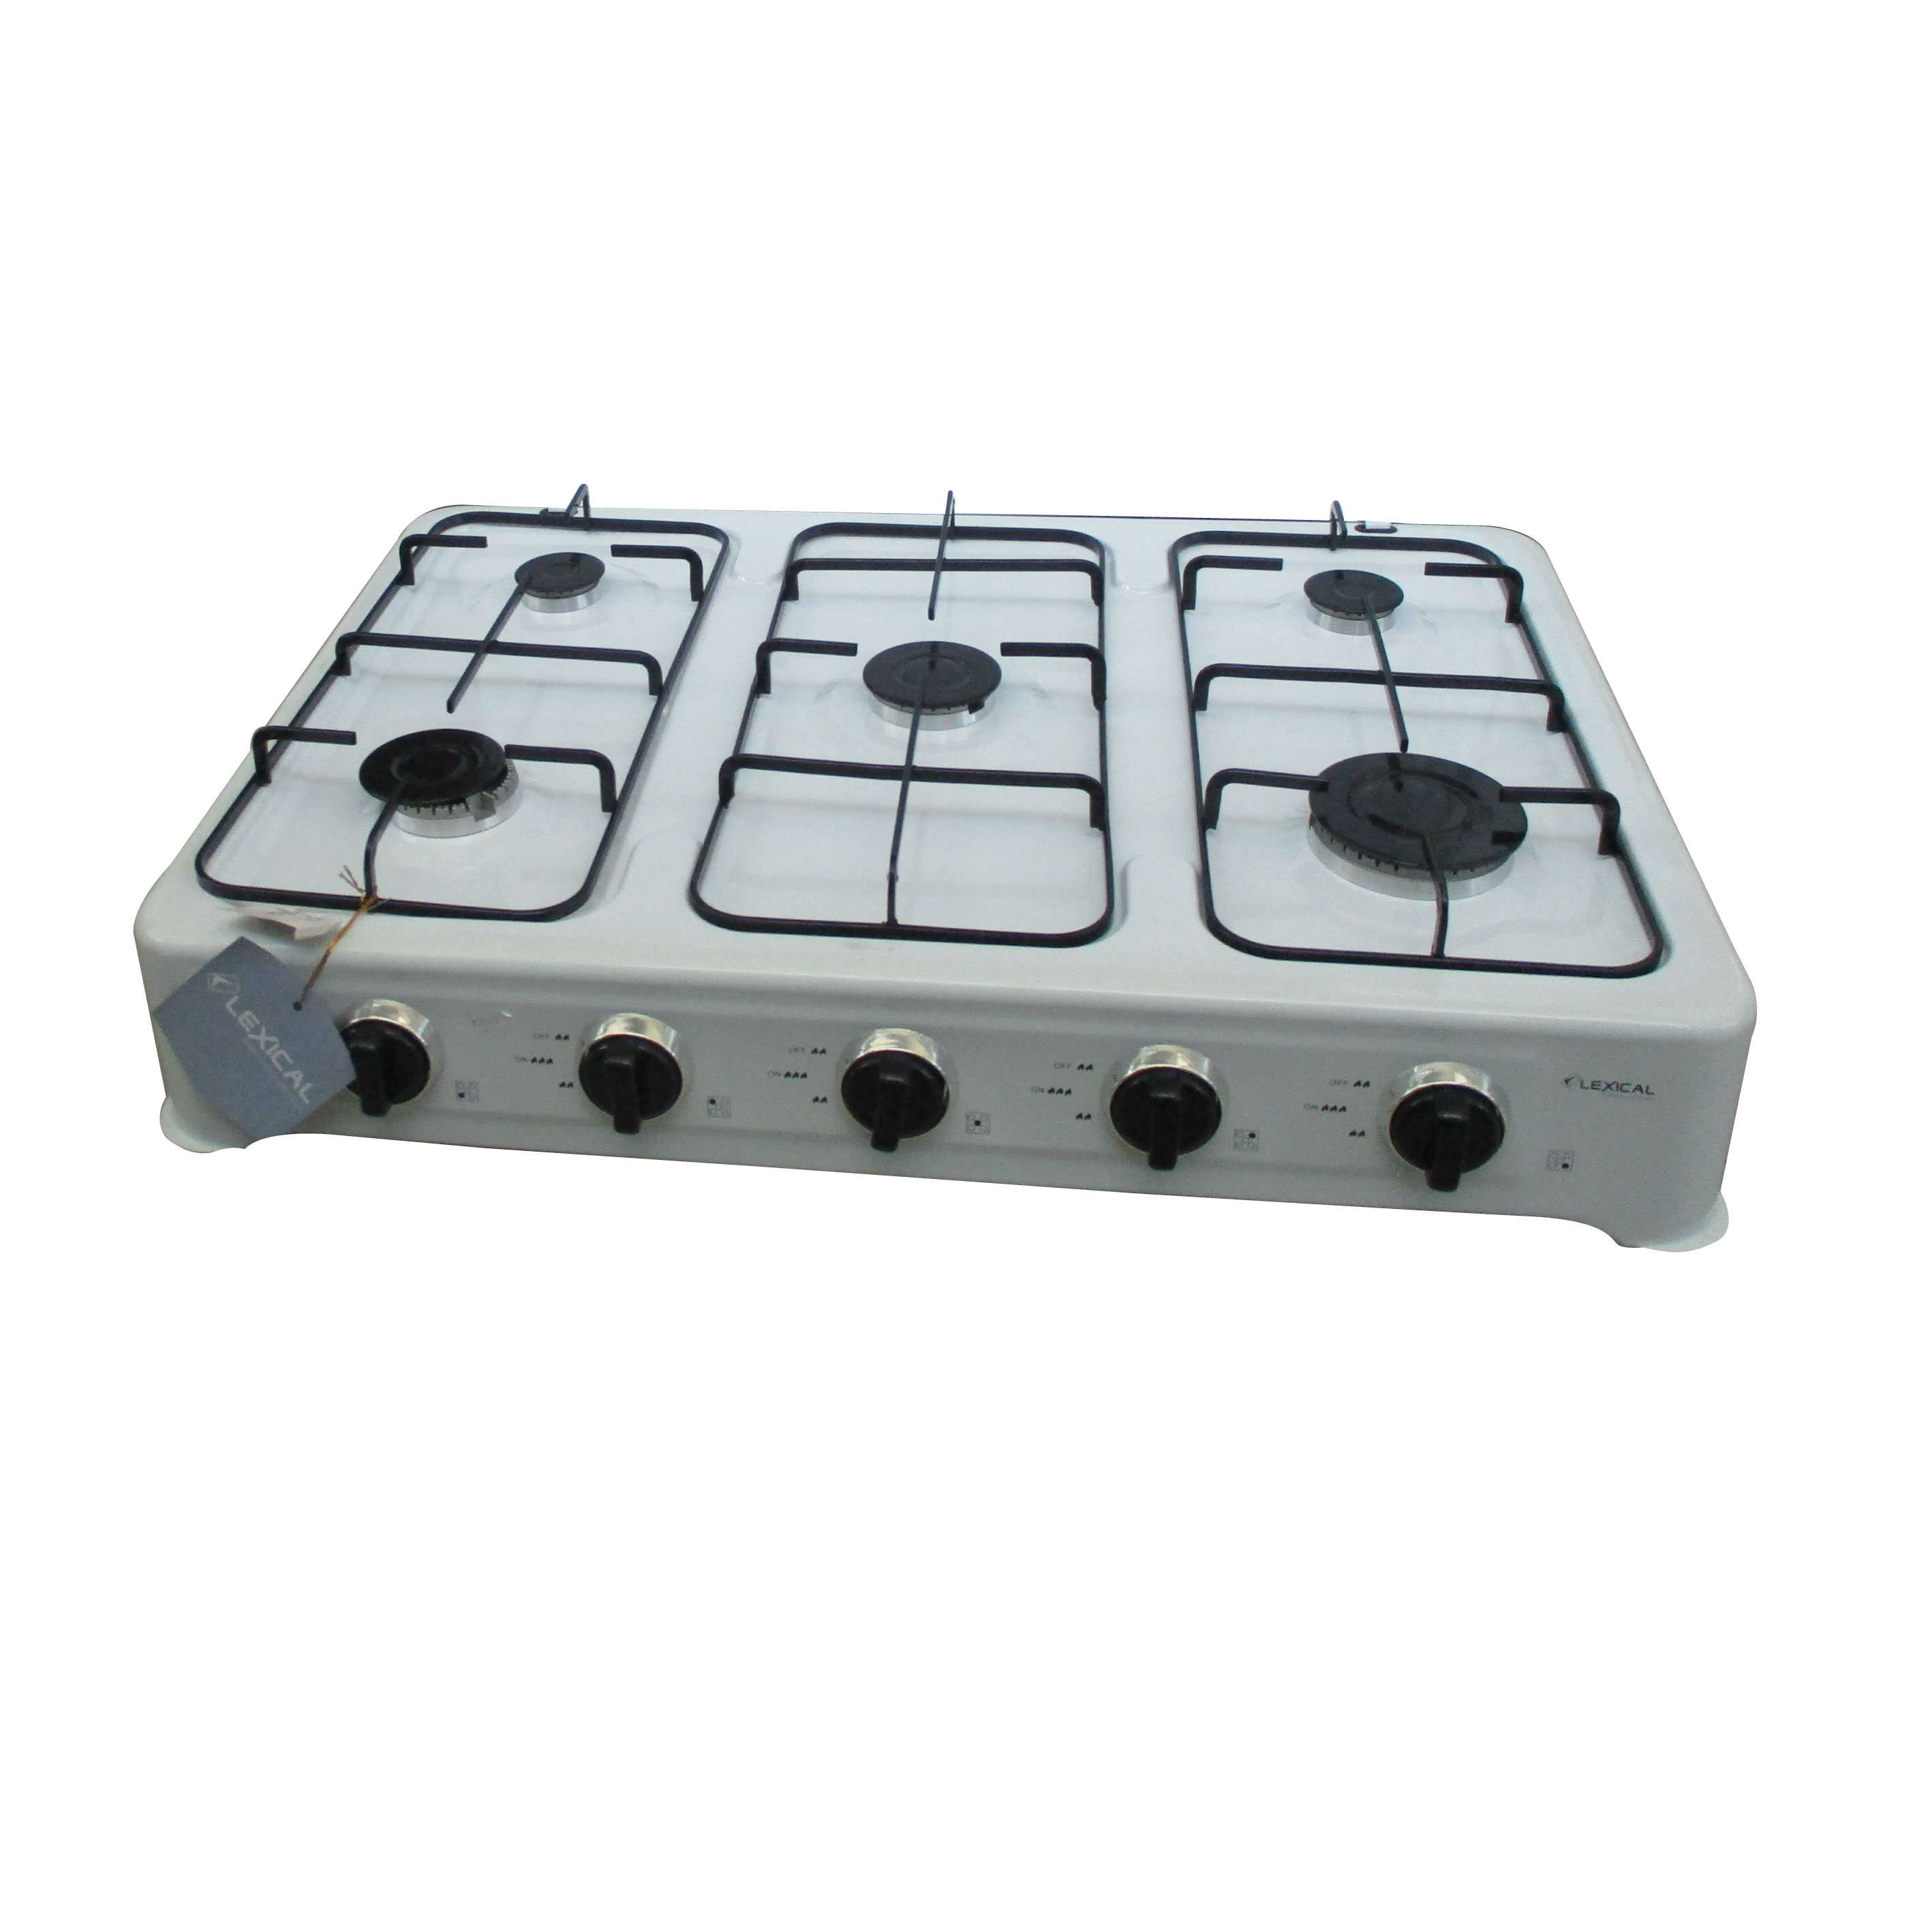 Lexical Gas Stove Table Top 5 Burners, SK350